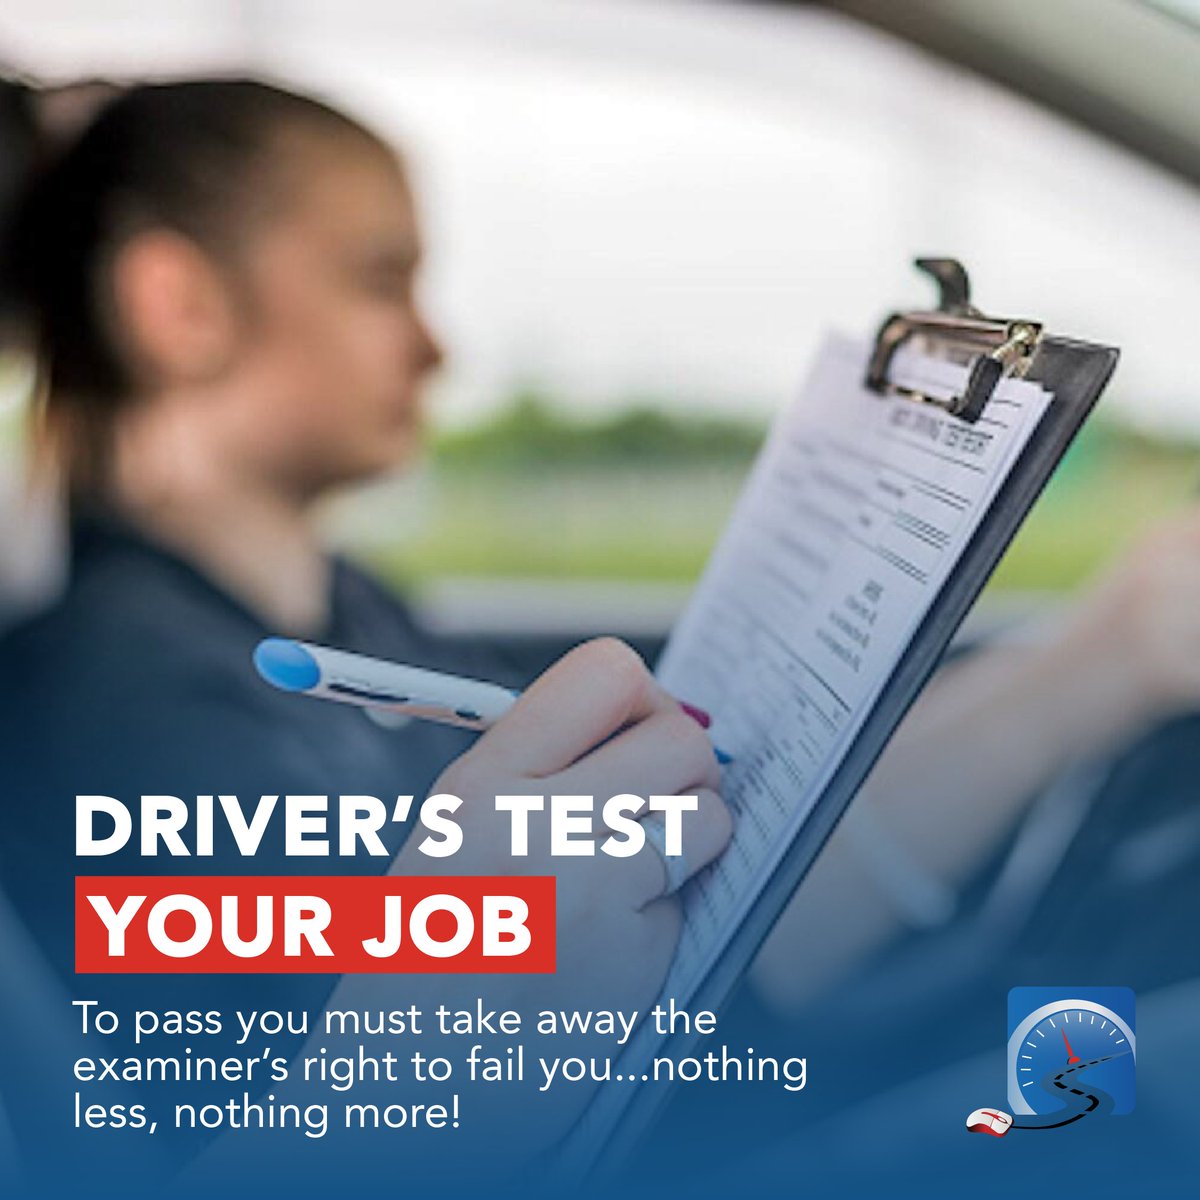 DON'T FAIL YOUR DRIVER'S TEST COURSE PKG LEARN MORE HERE:smartdrivetest.com/new-drivers/sm…
The Winter & Defensive Driving Smart Courses are included.

Buy the course to get all the details and correct information you need to pass your driver's test first time.

#drivingperformance #driving